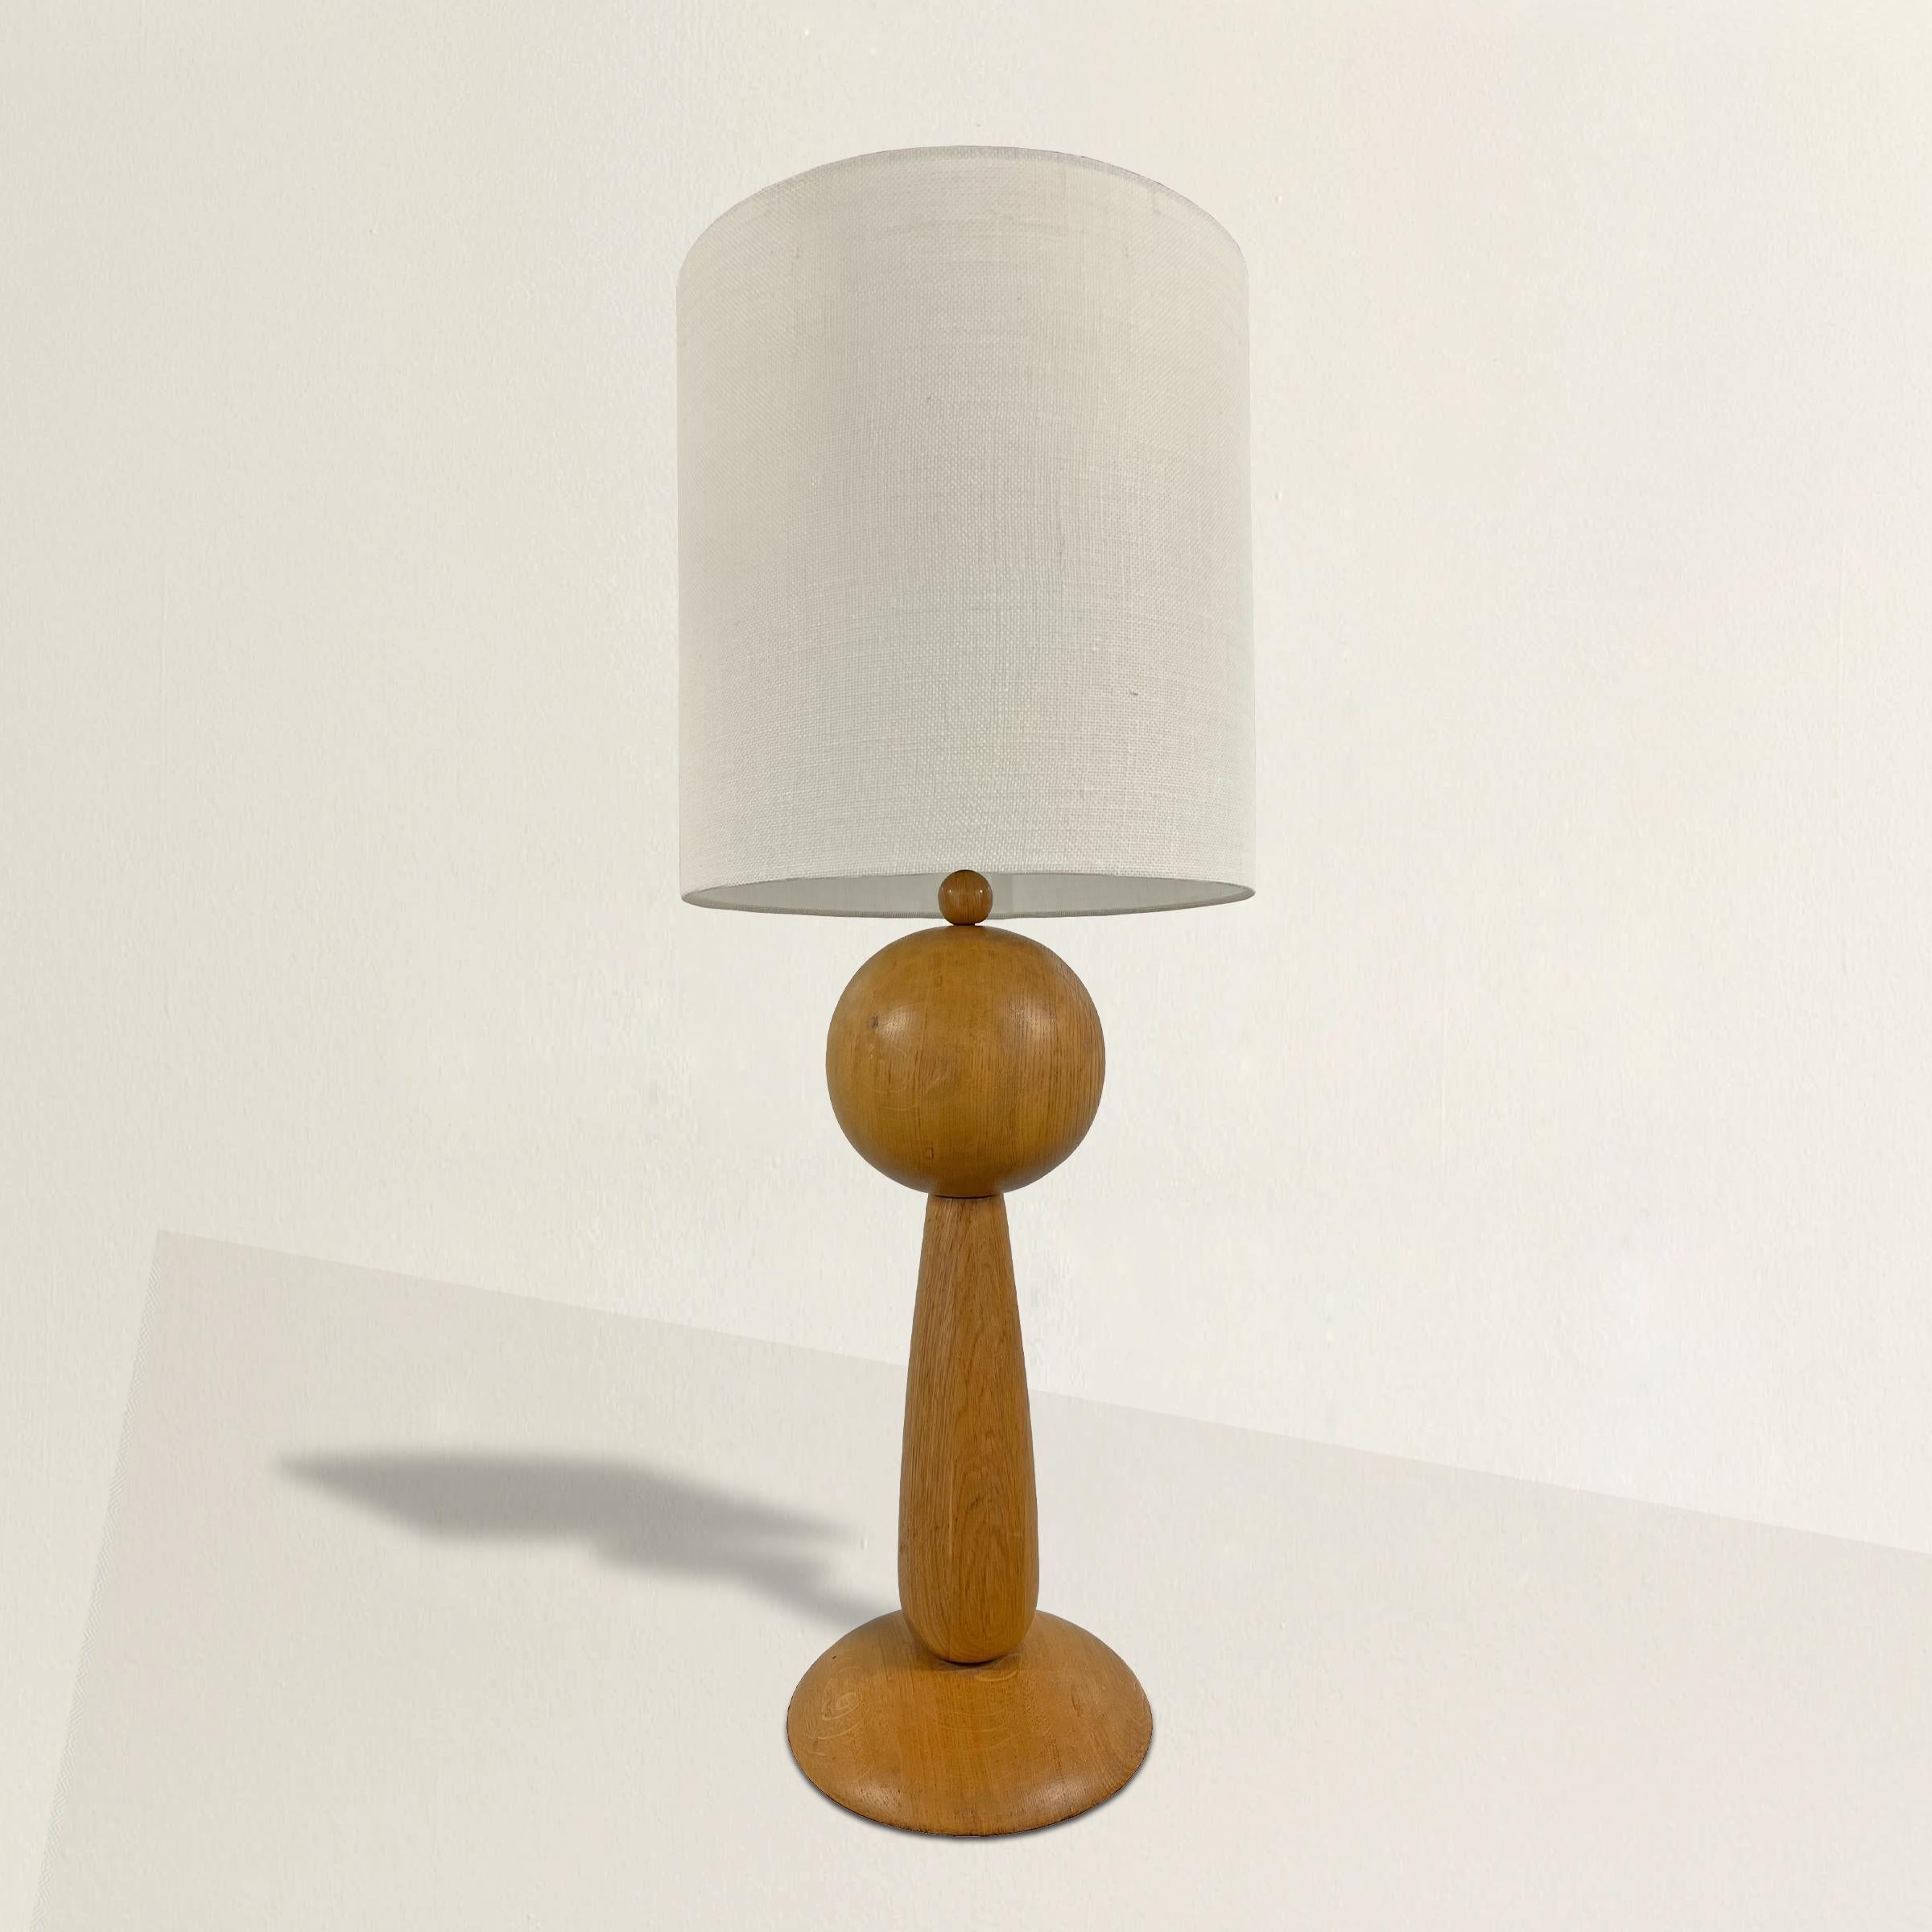 This 1950s French Modernist sculpture oak table lamp is a stunning exemplar of mid-century design, encapsulating the essence of the French Modernist movement. Crafted from massive oak, its form exudes both strength and elegance, a hallmark of this